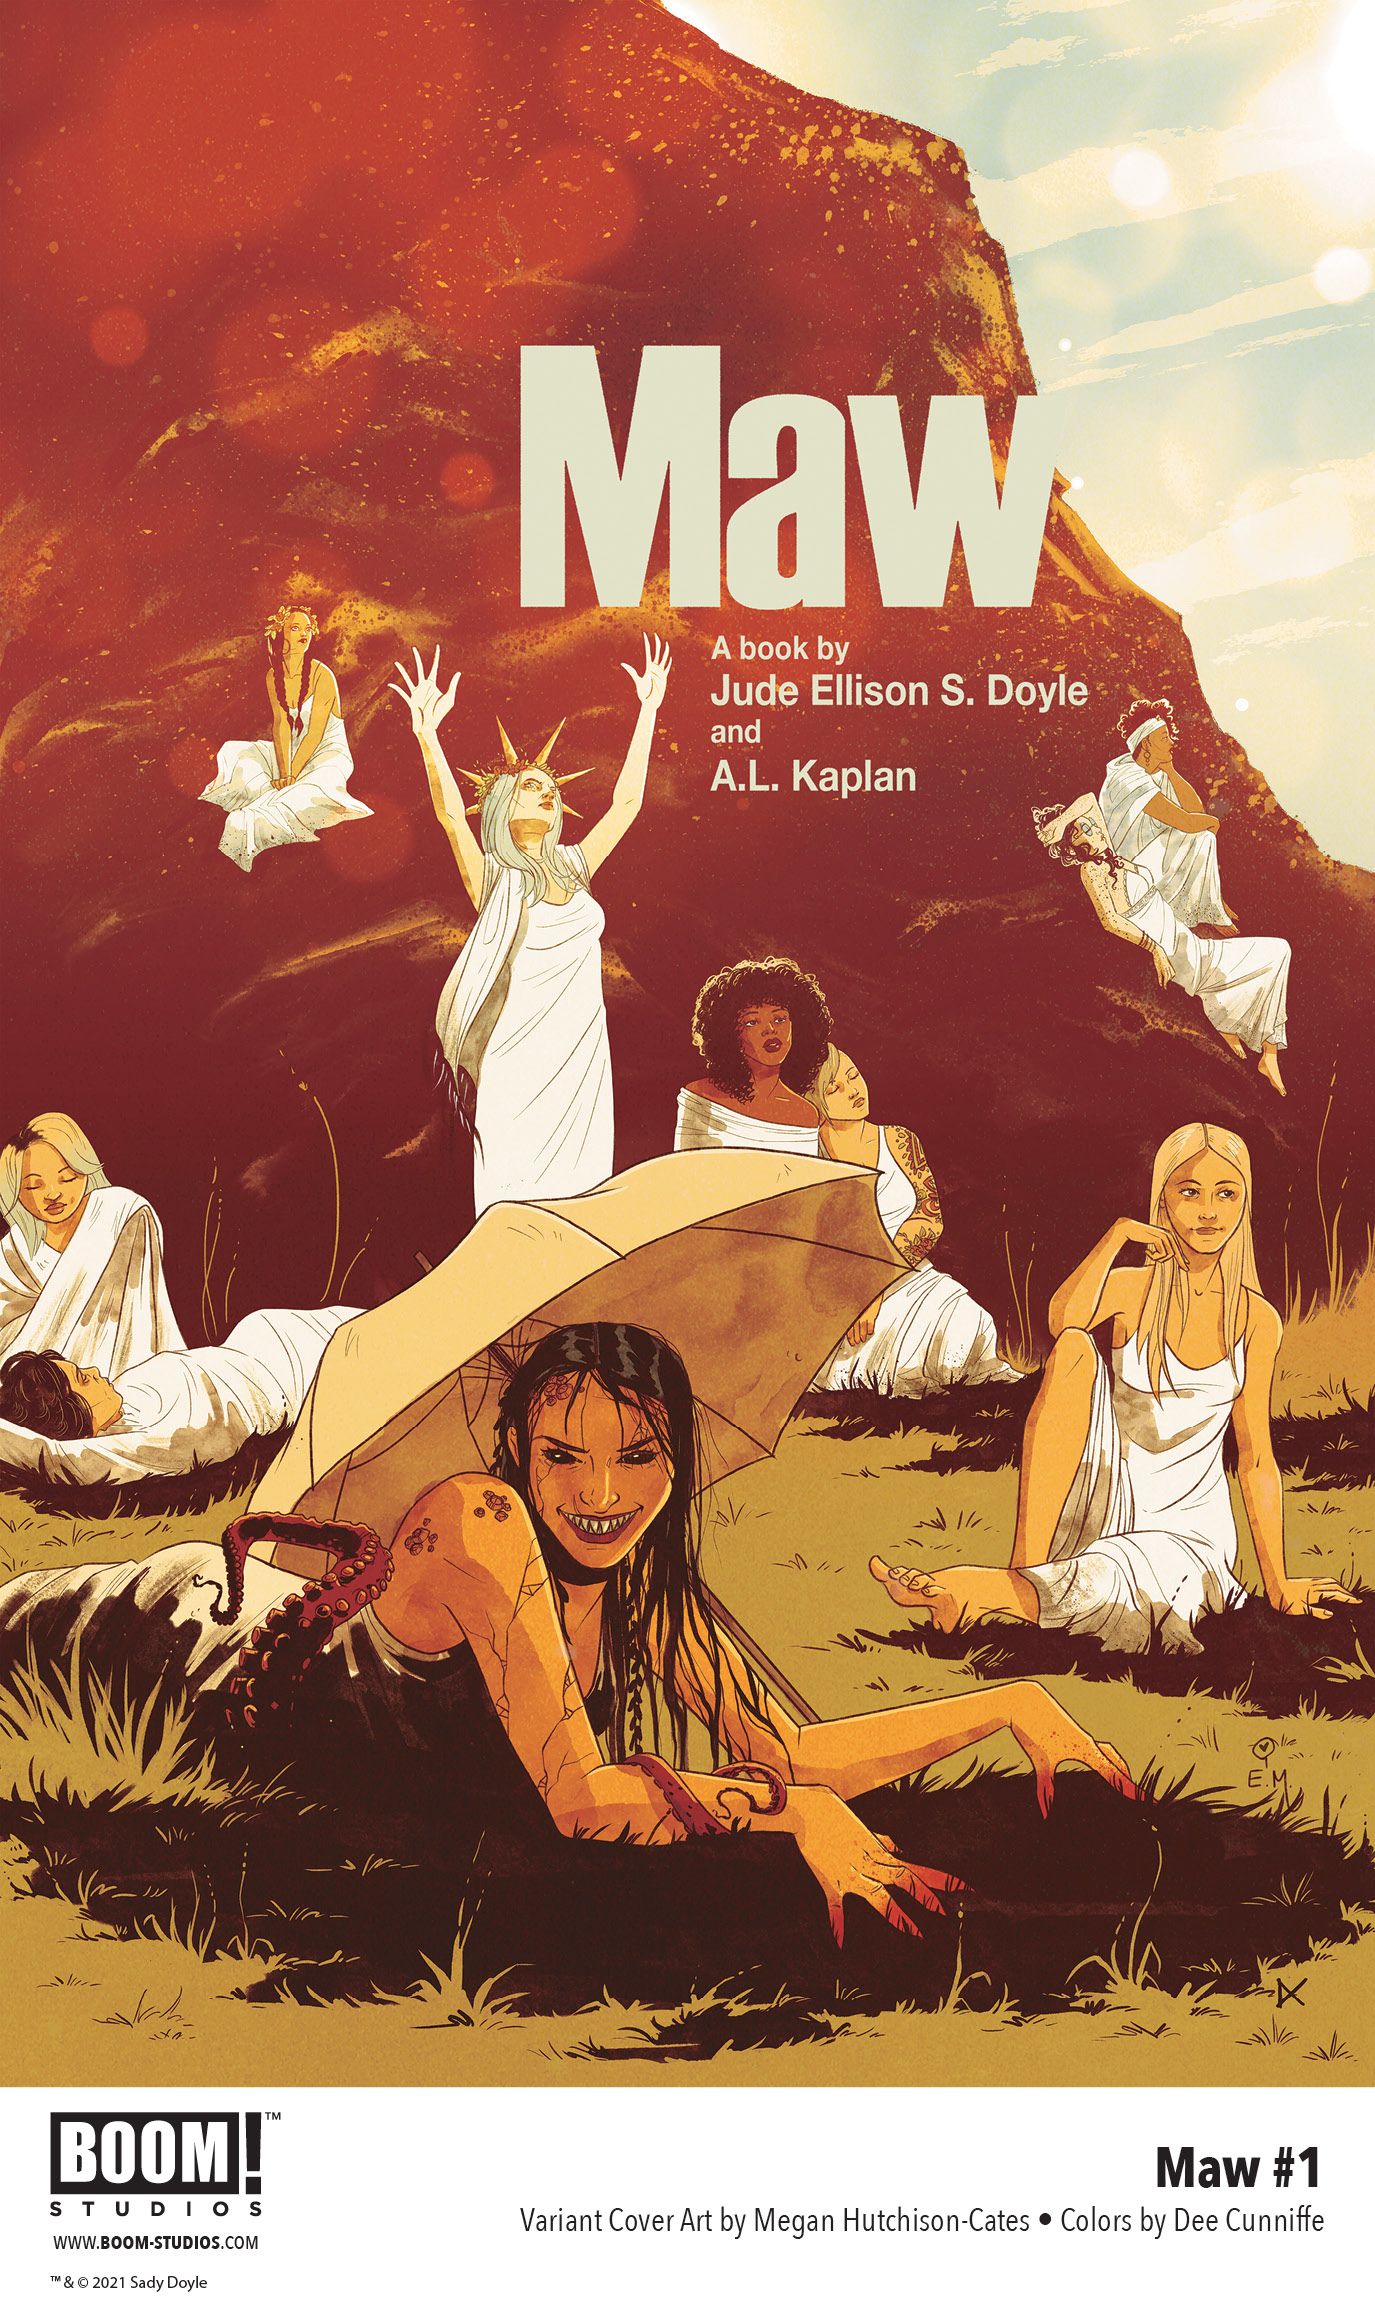 Your First Look at Jude Ellison S. Doyle and A.L. Kaplan’s MAW #1